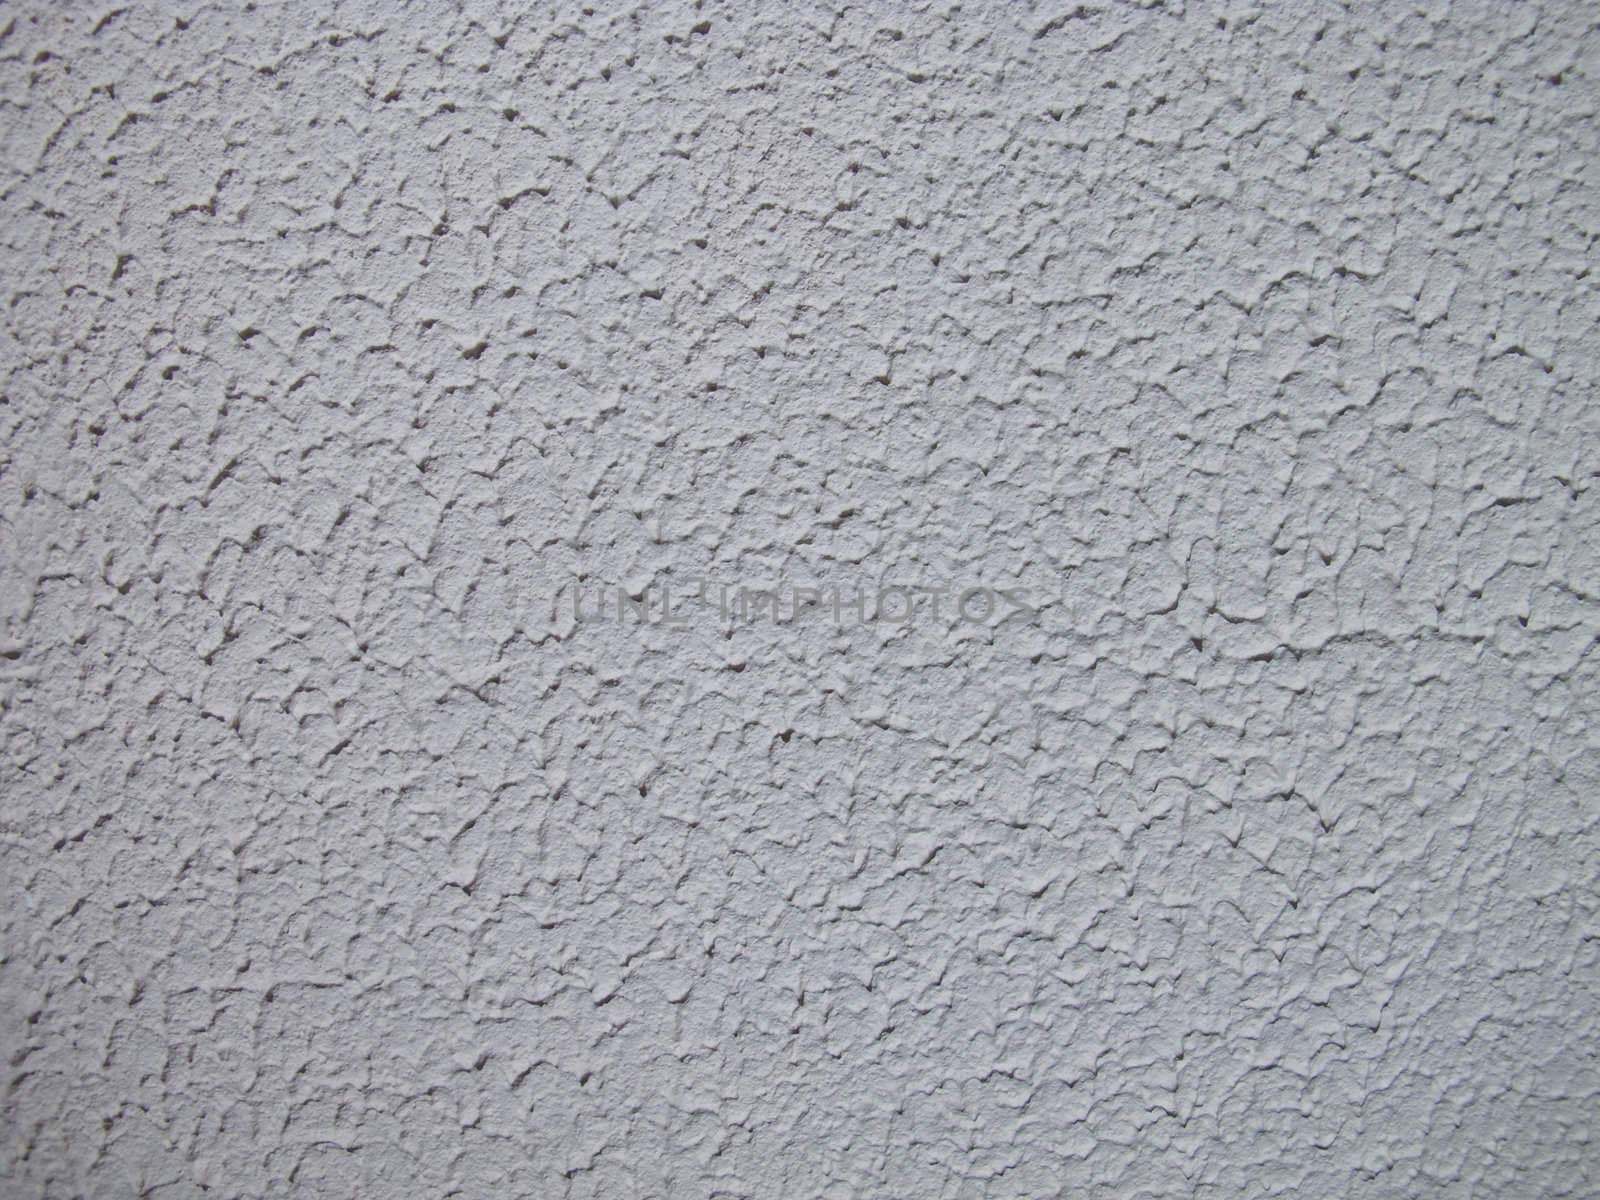 Texture on the wall at one studio